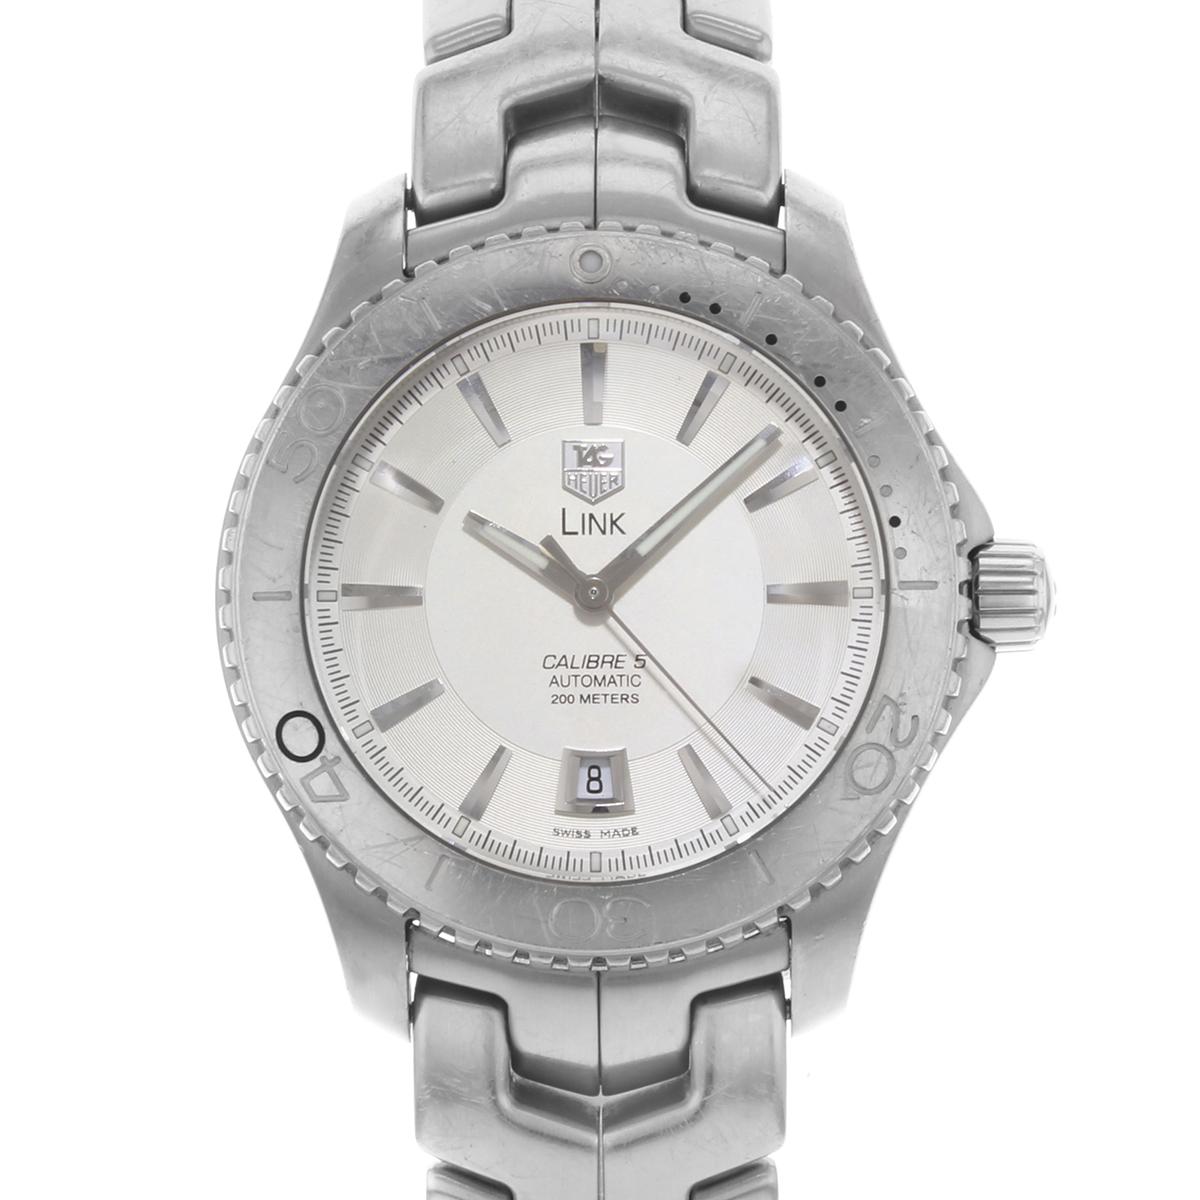 This pre-owned TAG Heuer Link  WJ201B.BA0591 is a beautiful men's timepiece that is powered by mechanical (automatic) movement which is cased in a stainless steel case. It has a round shape face, date indicator dial and has hand sticks style